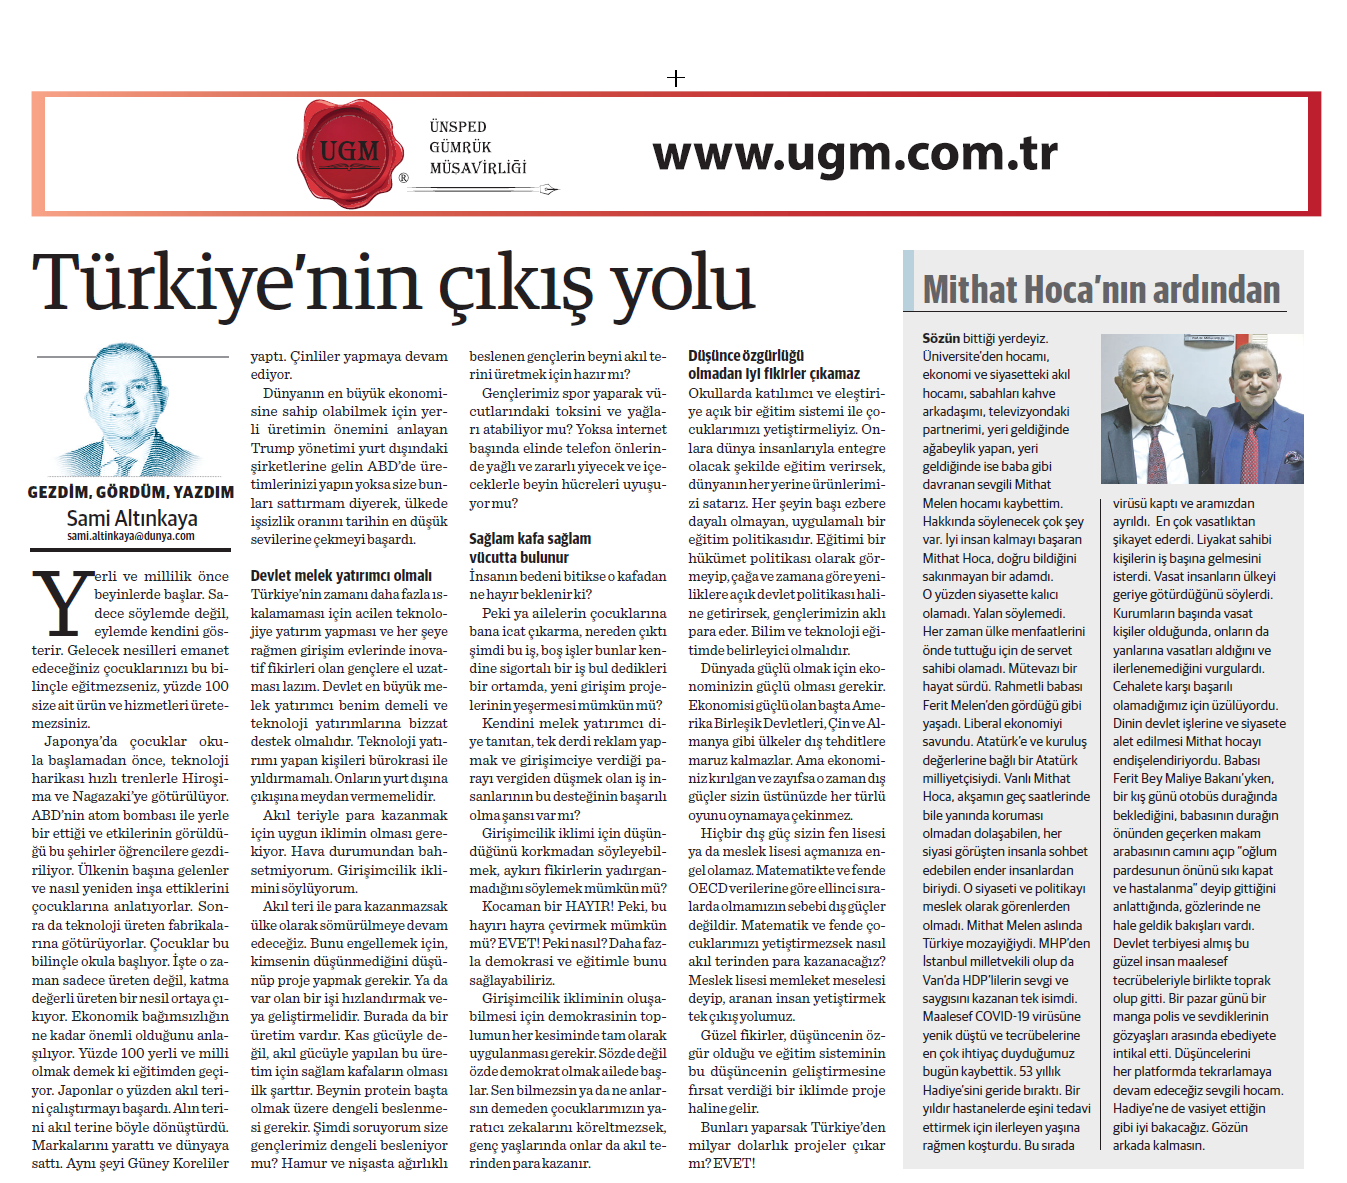 Our UGM Corporate Communications Director Sami Altınkaya's article entitled "The Way Out for Turkey" was published in the Dünya newspaper on 16.11.2020.